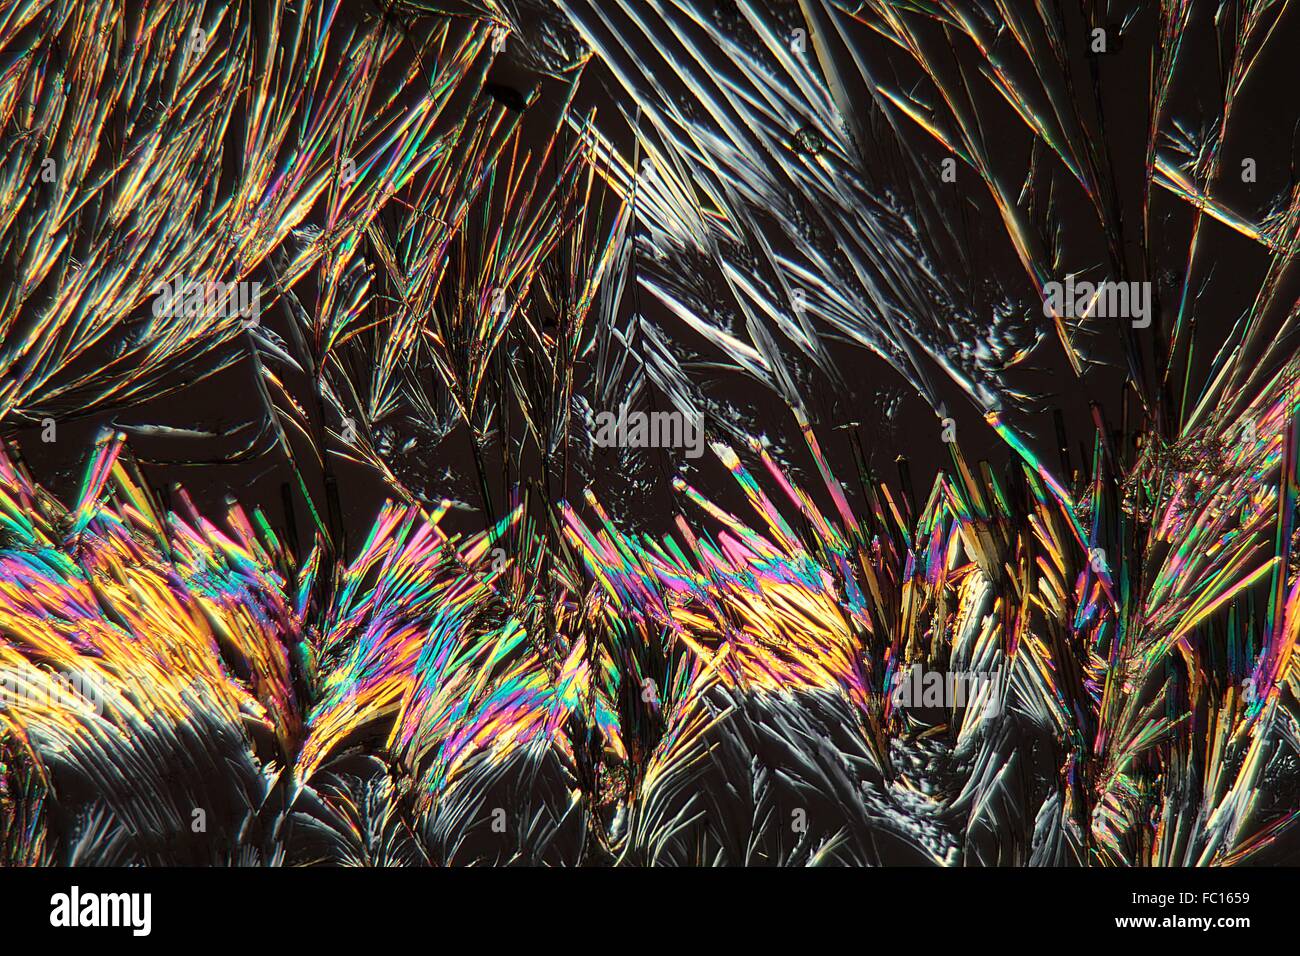 Coumarin crystals under the Microscope Stock Photo